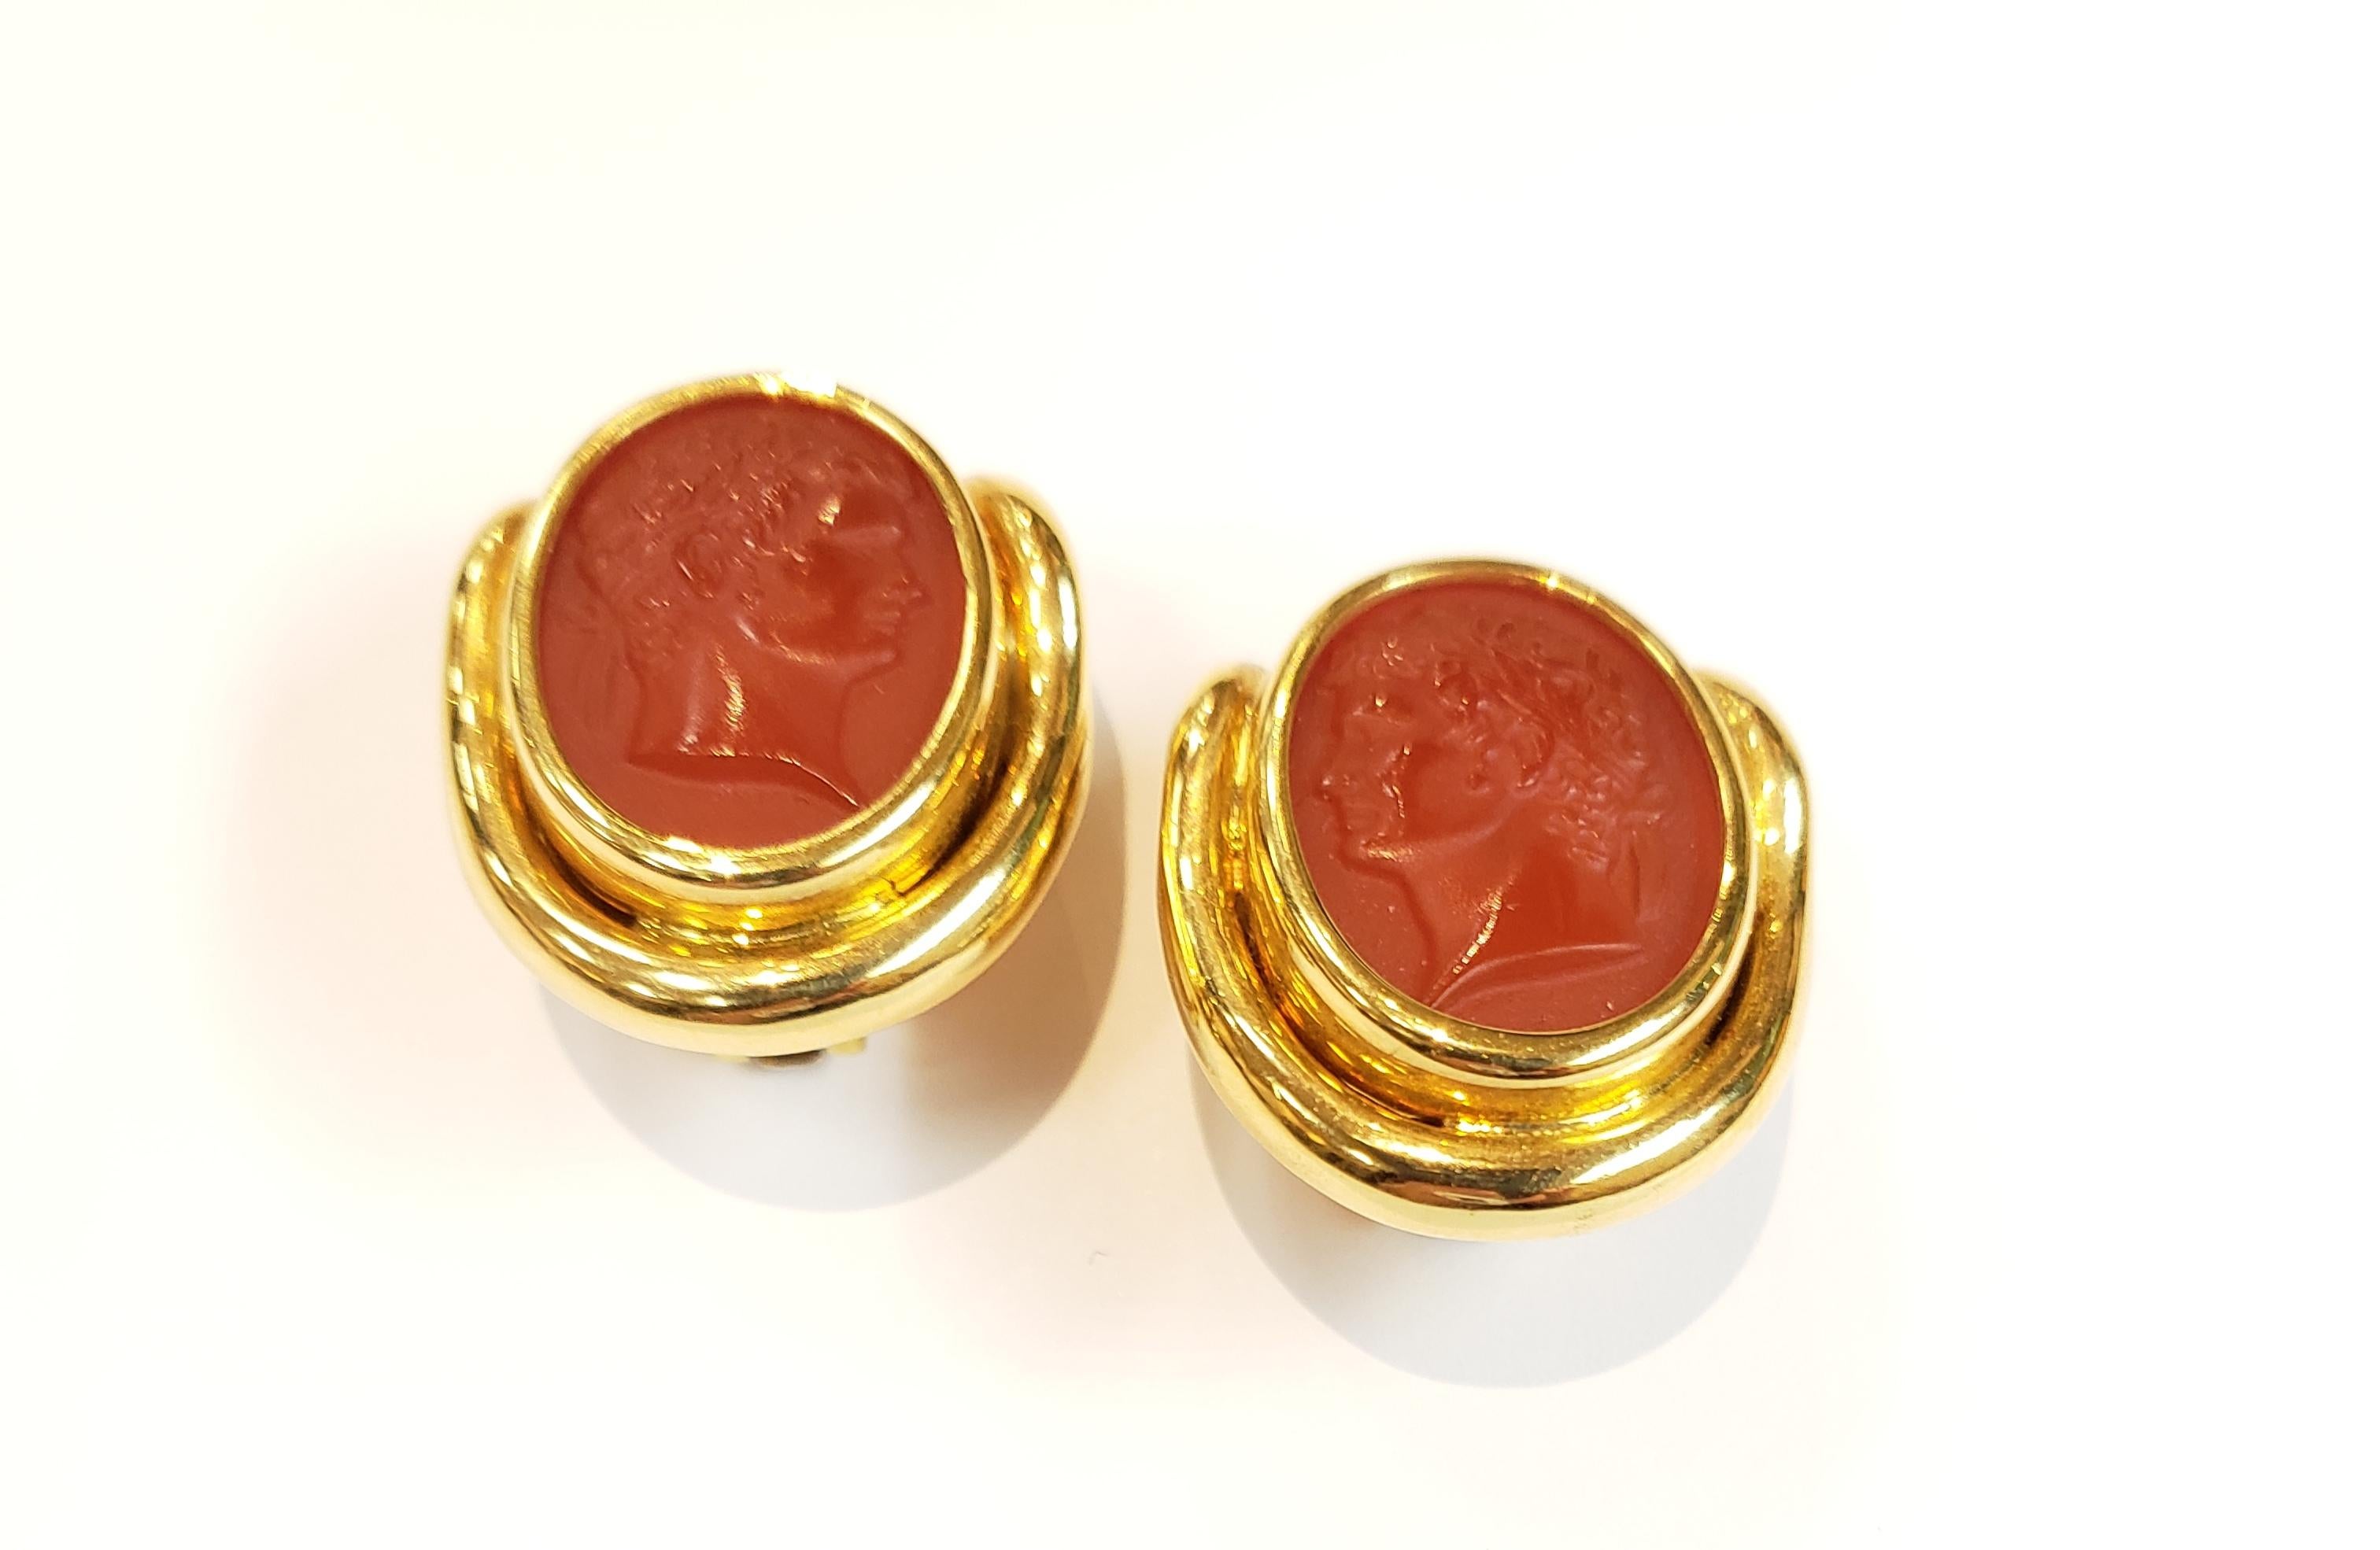 Contemporary Italian Made 18 Karat Yellow and Carnelian Intaglio Earrings by Vaid Roma For Sale